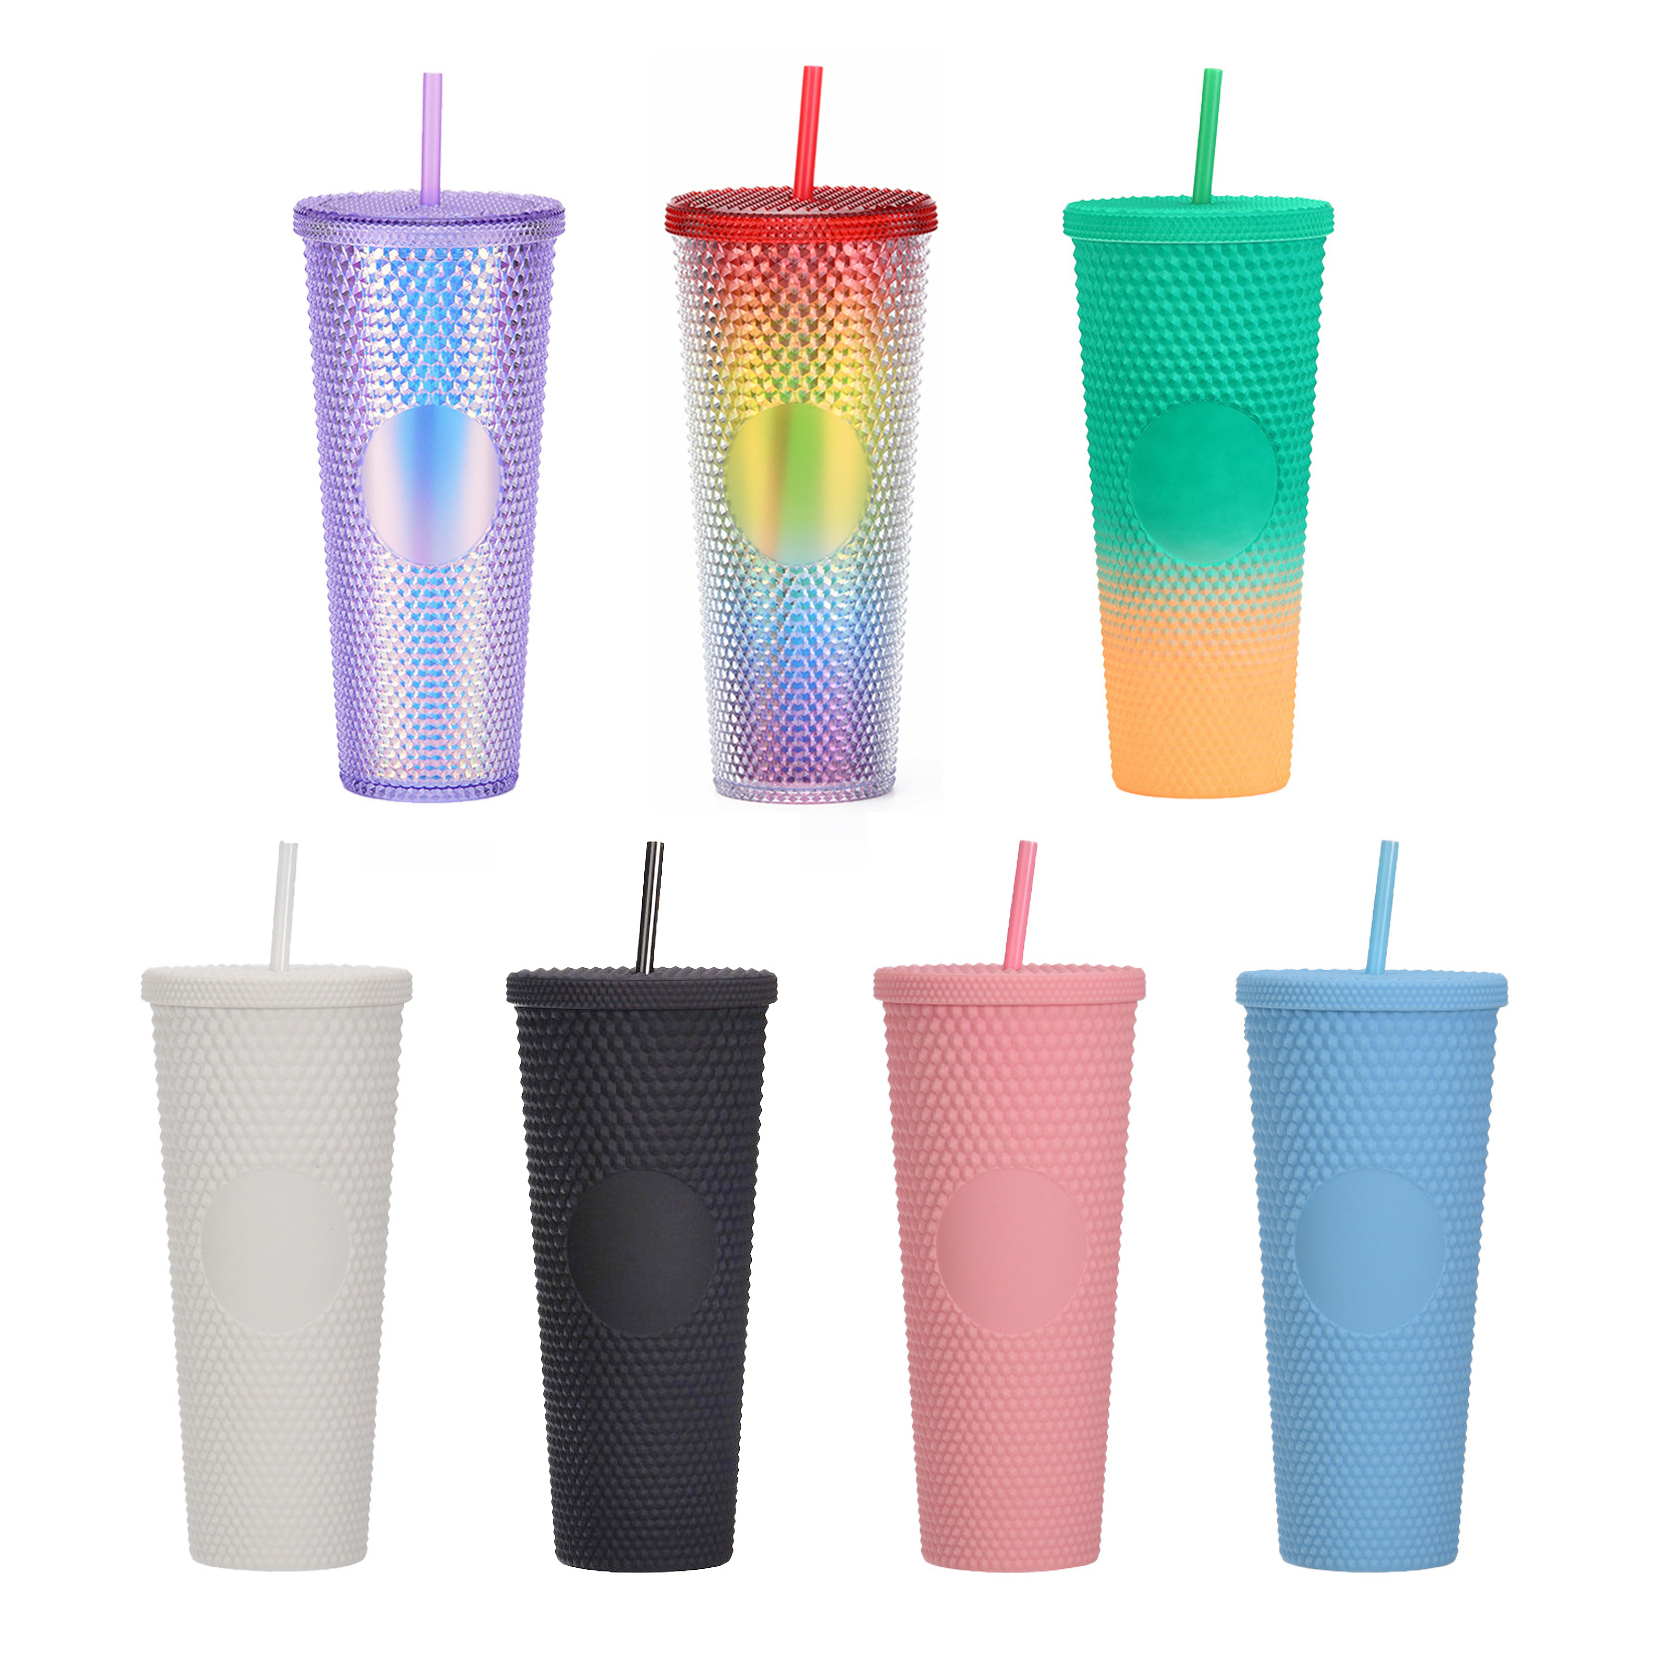 Wholesale Tumbler With Straw Products at Factory Prices from Manufacturers  in China, India, Korea, etc.